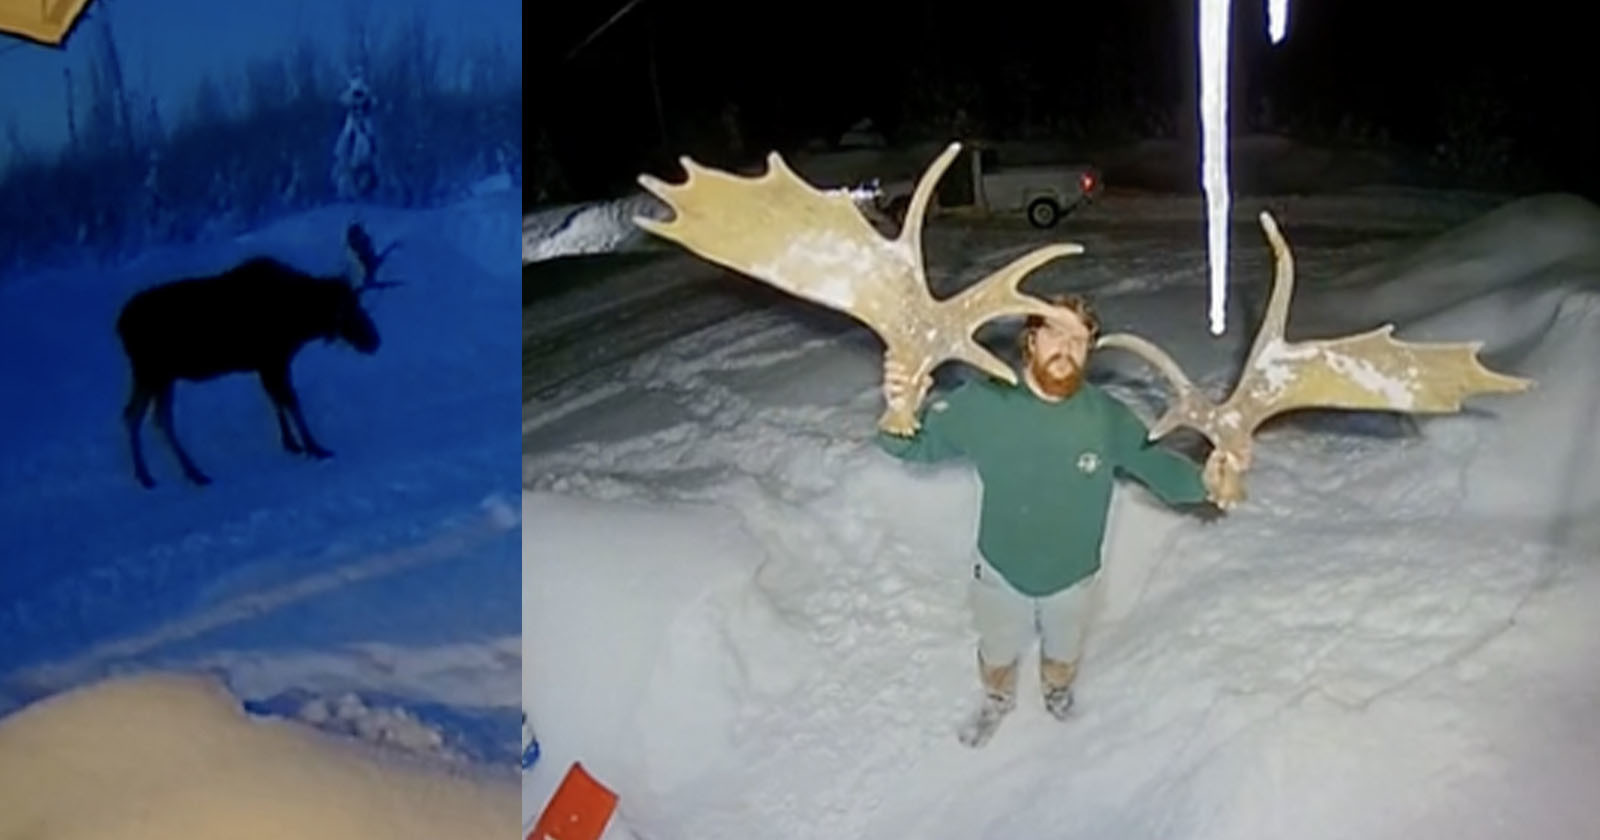 Ring Doorbell Camera Captures Rare Moment a Moose Sheds its Antlers